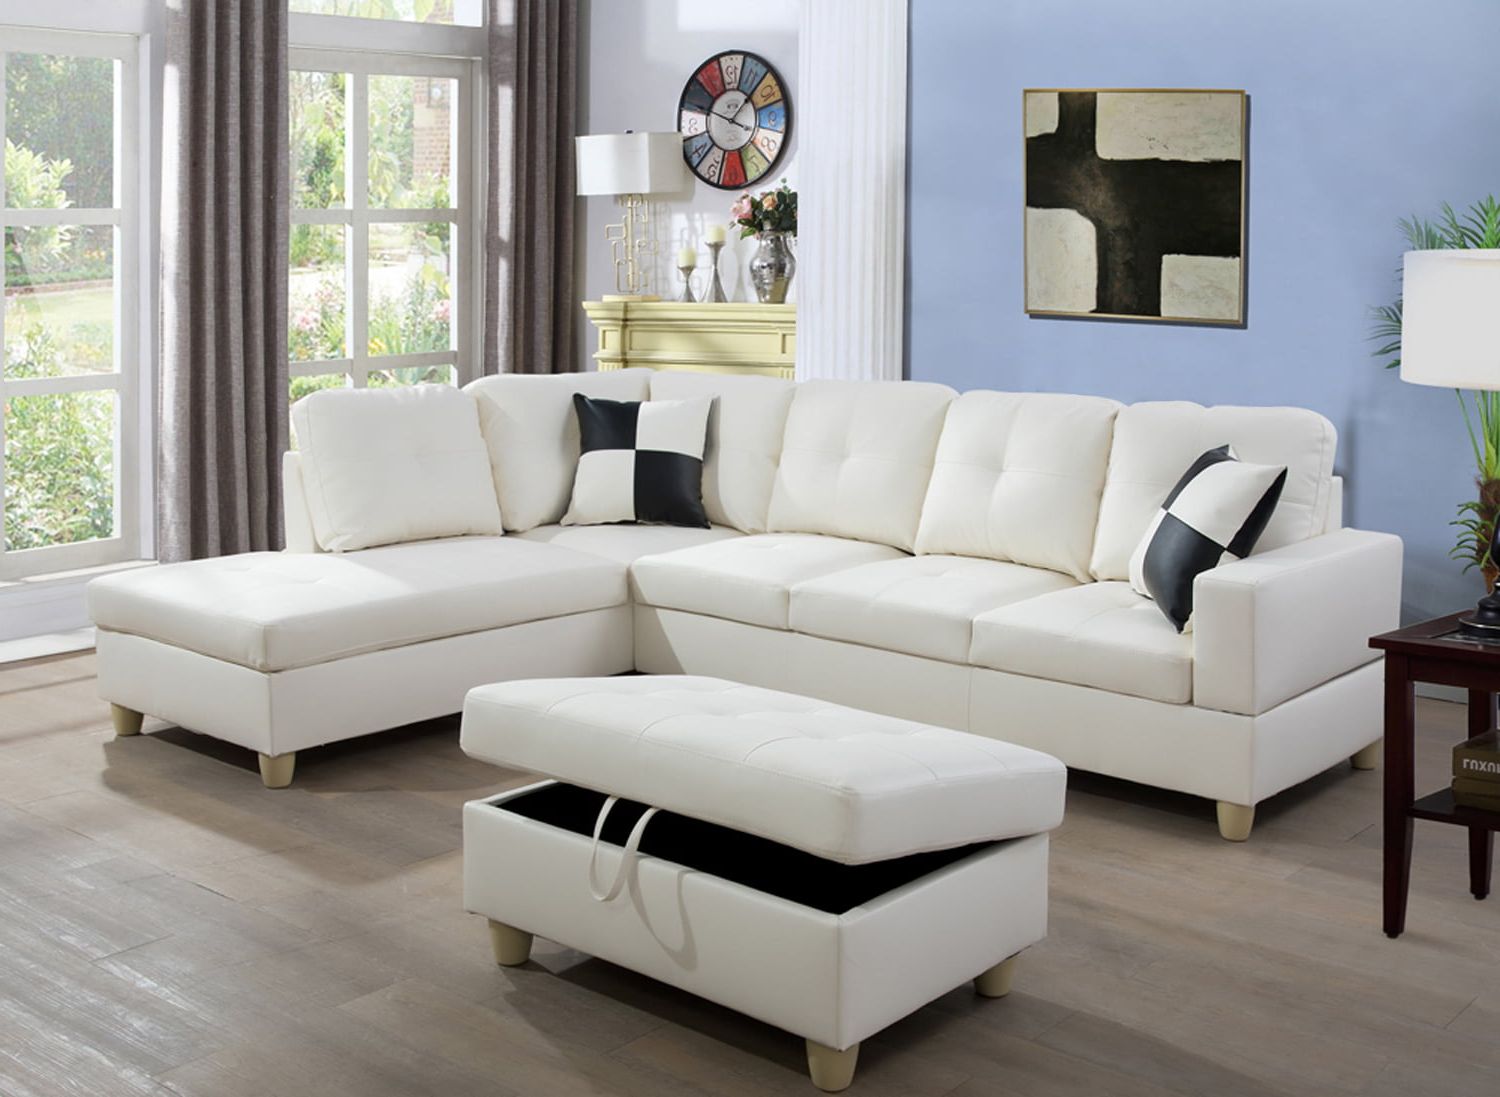 Faux Leather Sectional Sofa Sets Pertaining To Most Popular Ainehome Faux Leather Sectional Set, Living Room L Shaped Modern Sofa (View 5 of 15)